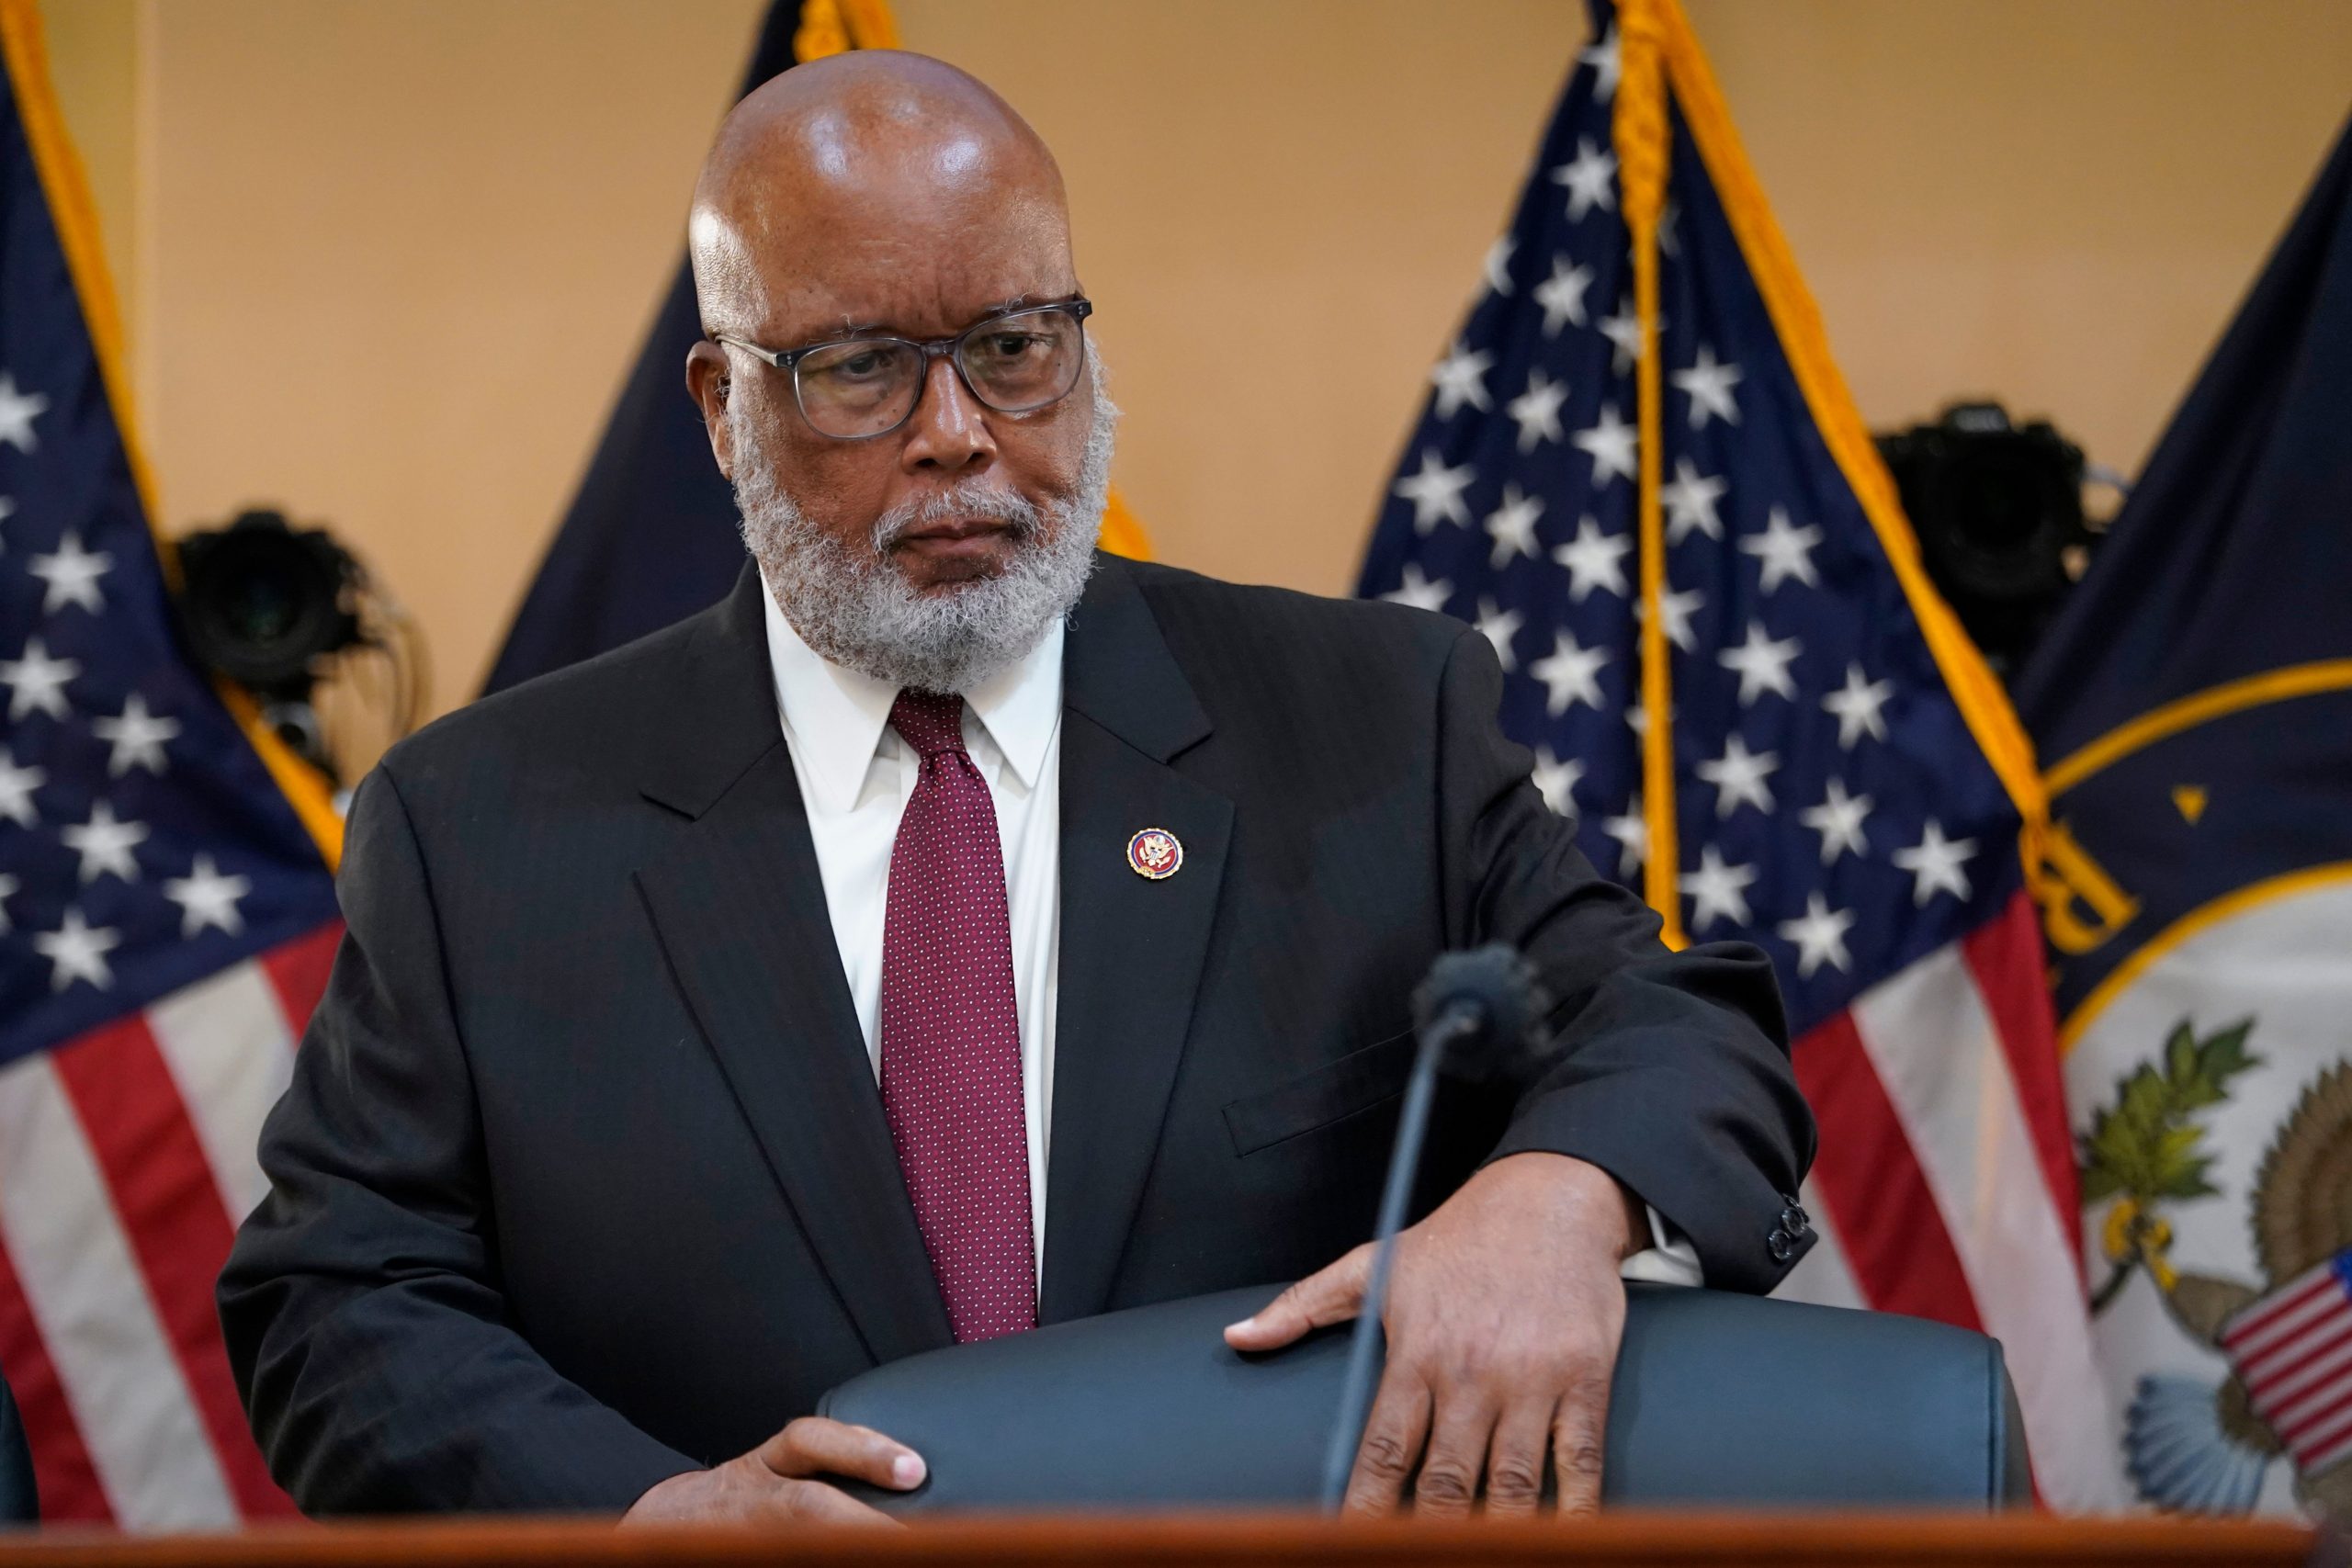 January 6 hearings Day 9: Chairman Rep. Bennie Thompson opening statement